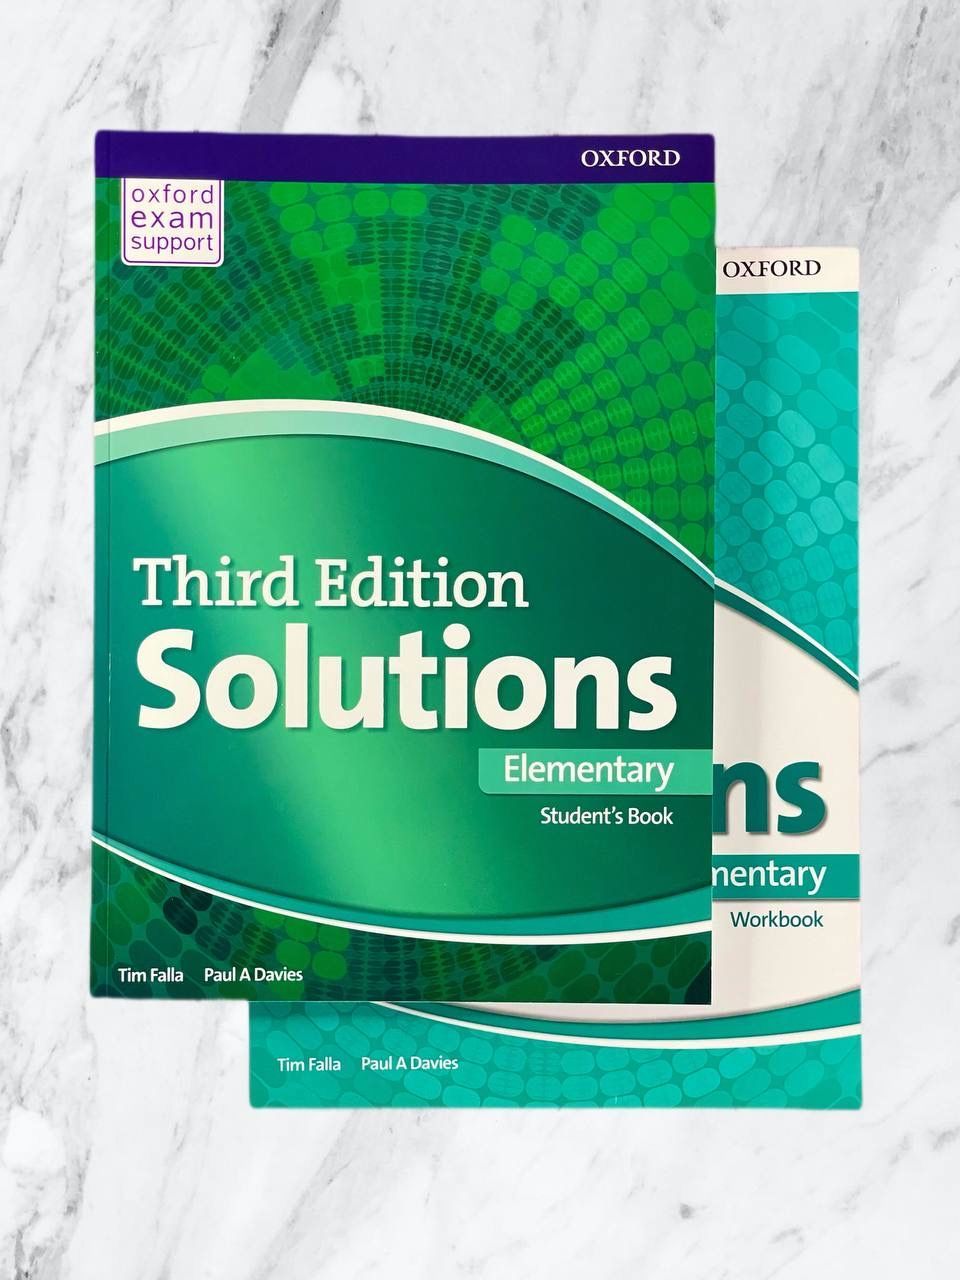 Solutions Elementary 3rd Edition. Solutions Elementary student's book. Third Edition solutions Elementary Workbook. Solutions Elementary 3rd Edition student's book. Solutions elementary 3rd students book